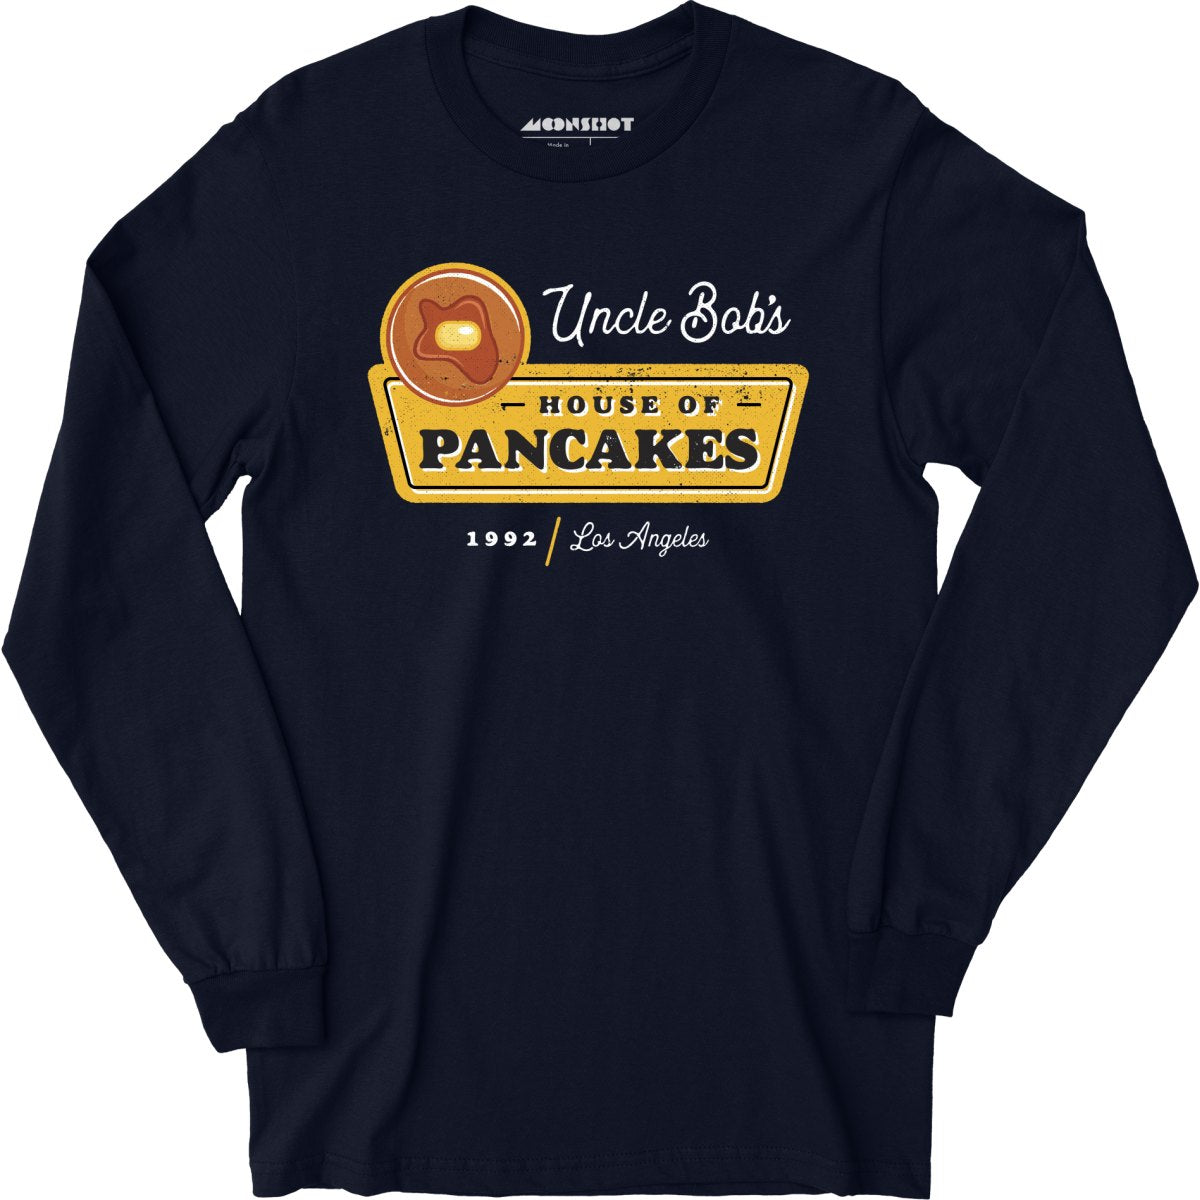 Uncle Bob's House of Pancakes - Reservoir Dogs - Long Sleeve T-Shirt